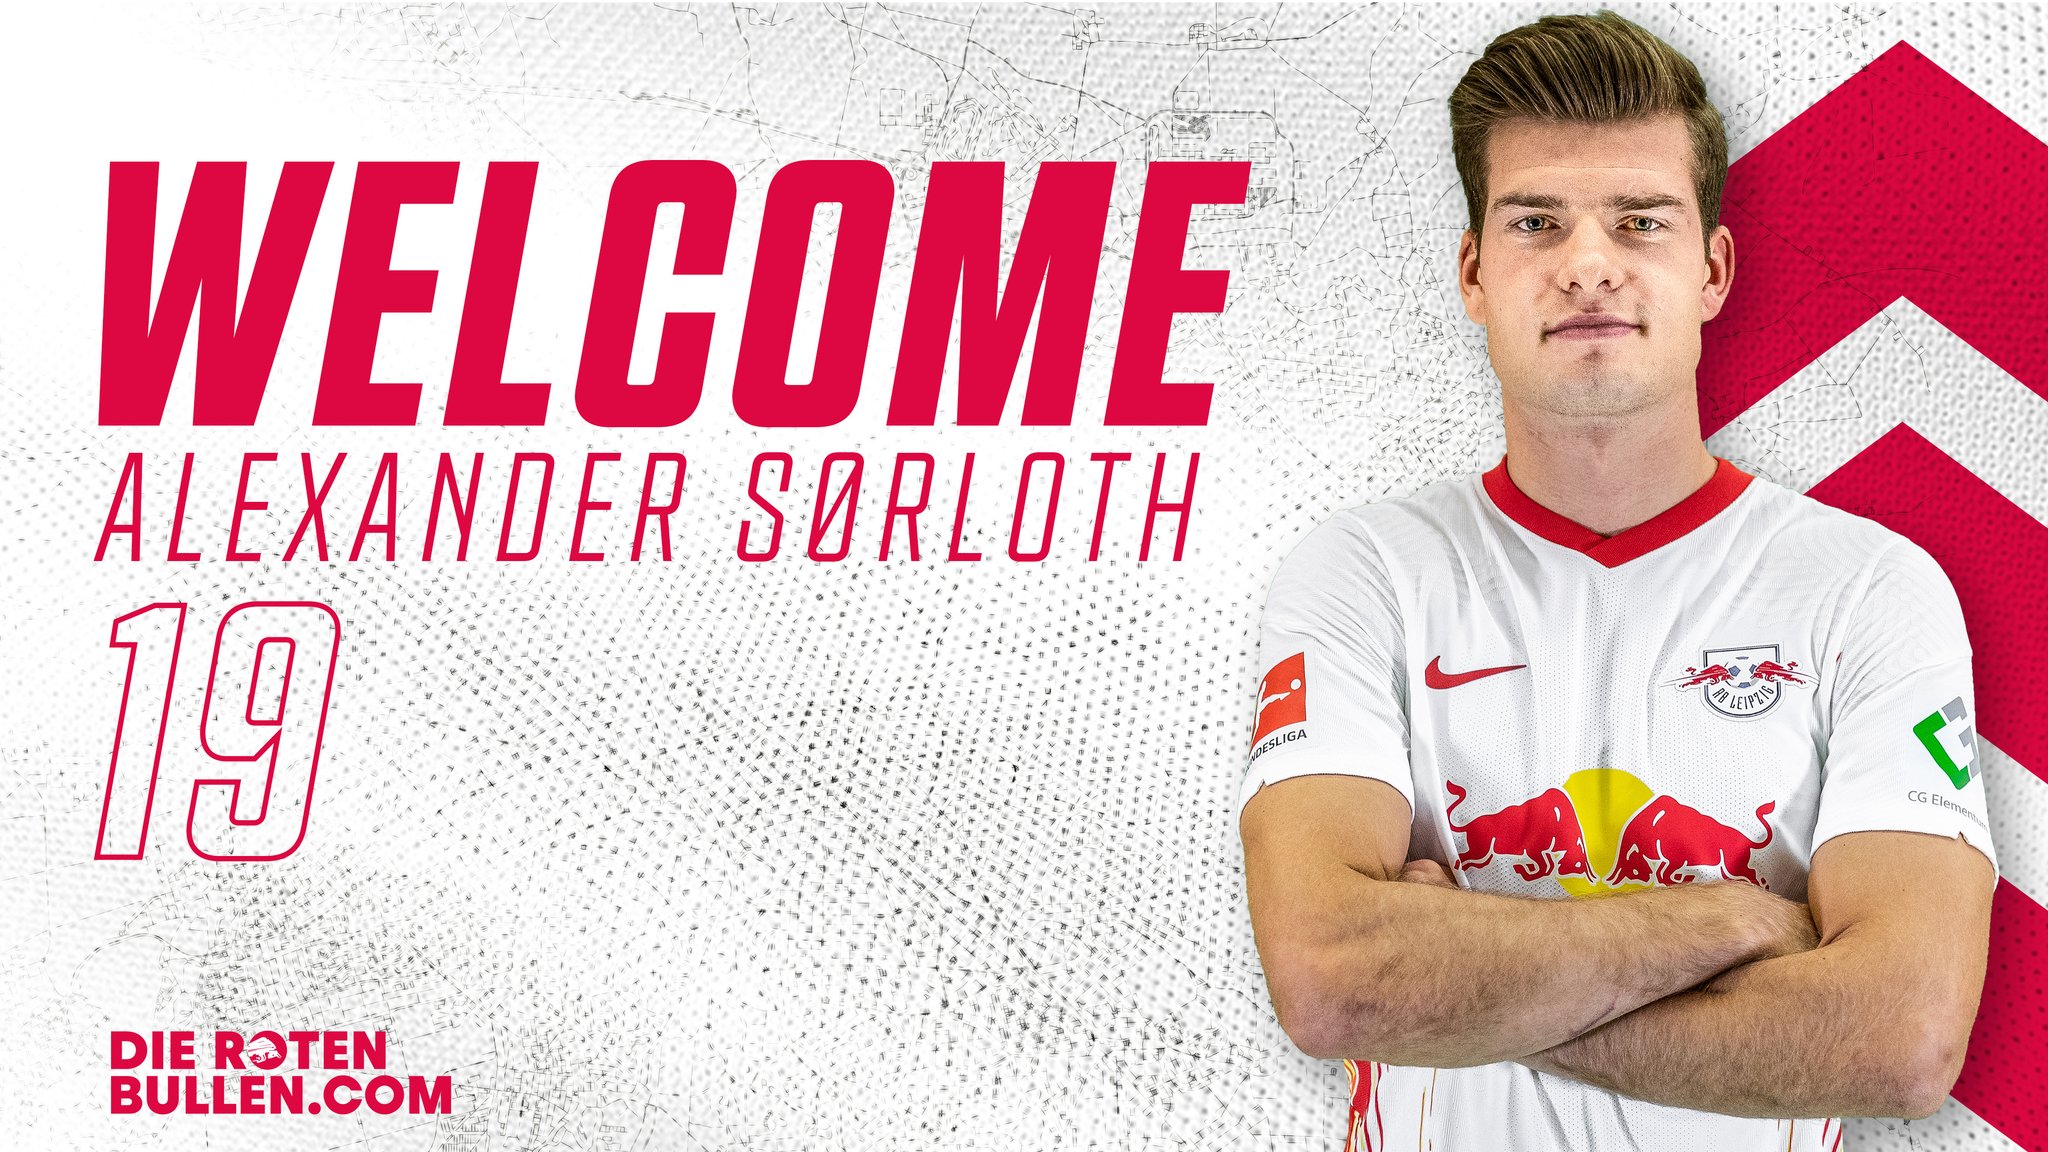 RB Leipzig English #RBLeipzig Are Pleased To Announce The Signing Of Norwegian International Alexander #Sørloth ✍️ The 24 Year Old Has Signed A 5 Year Contract And Will Wear The Number 1️⃣9️⃣ Shirt